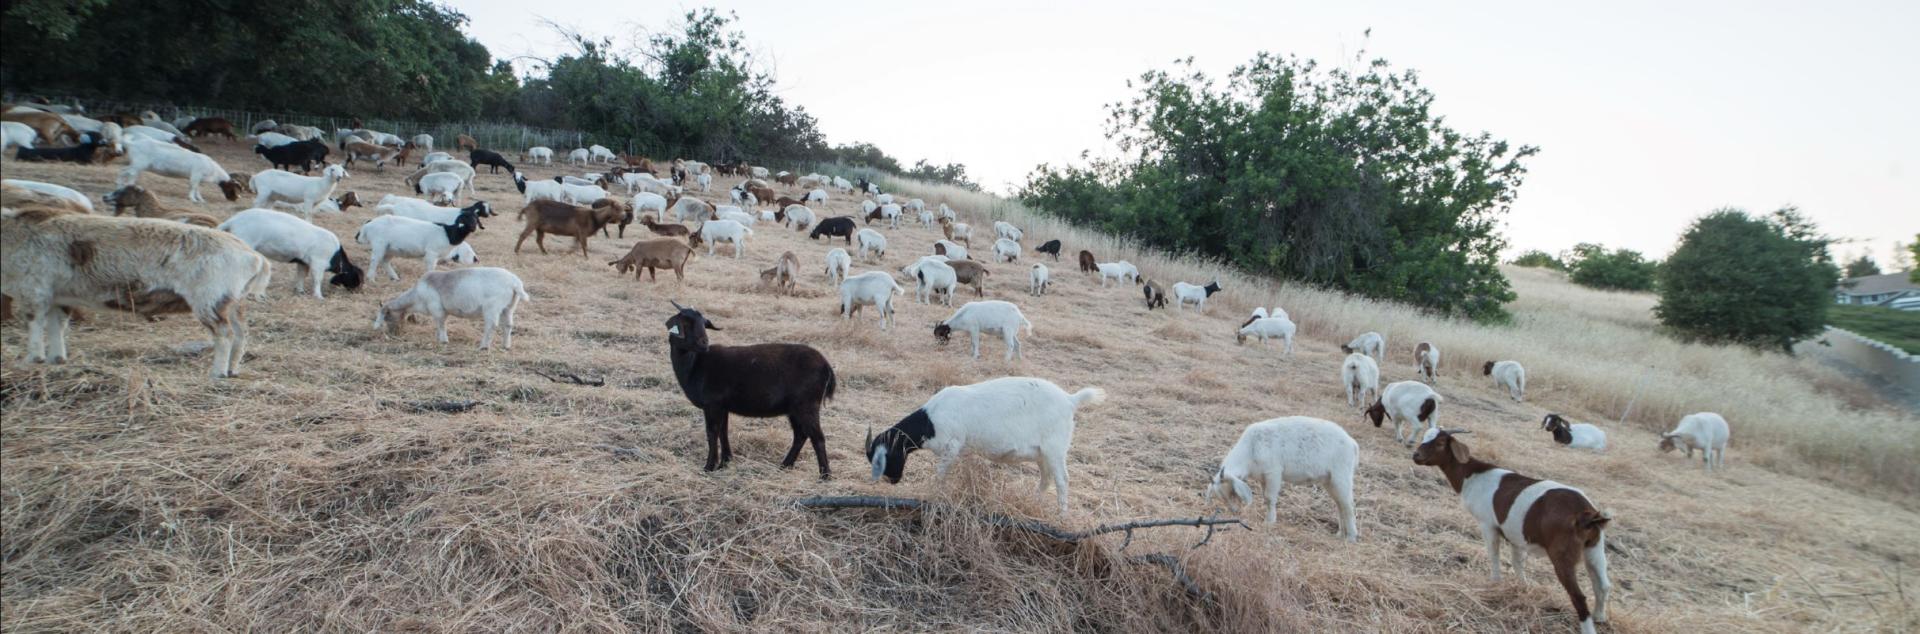 A picture of goats and sheep grazing in a field.